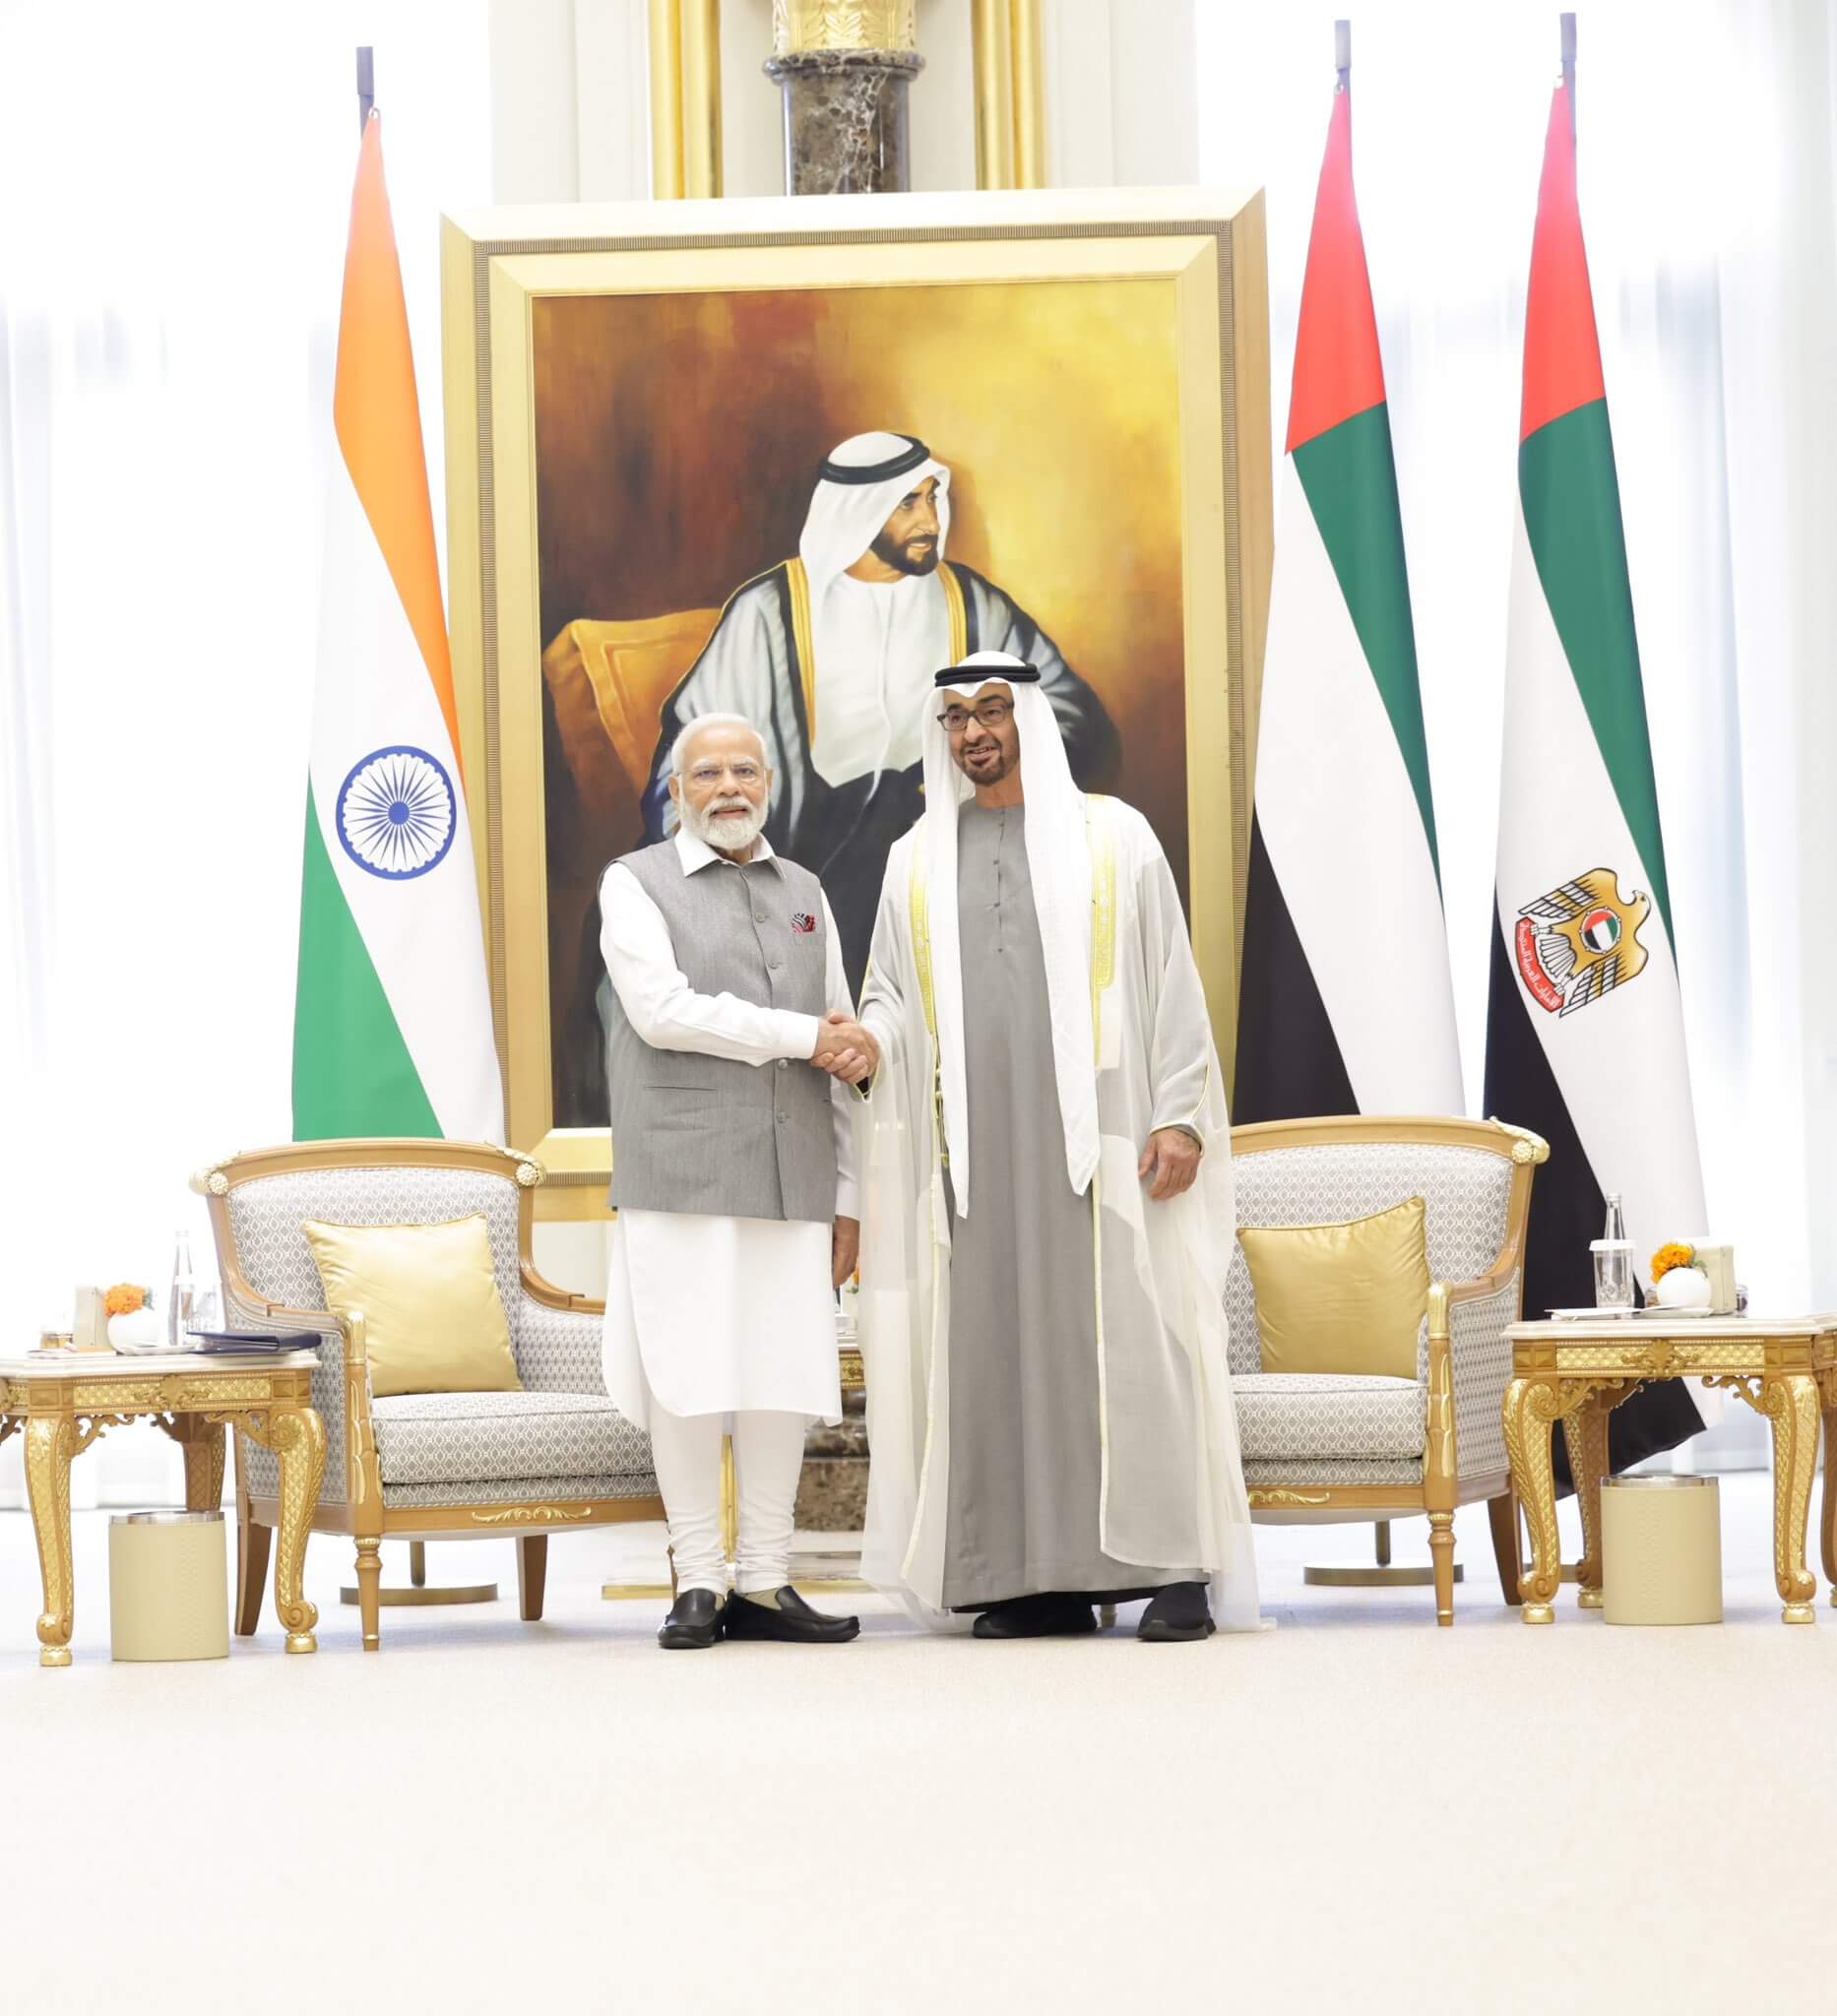 India, UAE Sign Pact to Settle Trade in Rupees, Dirhams During PM Modi’s Abu Dhabi Visit